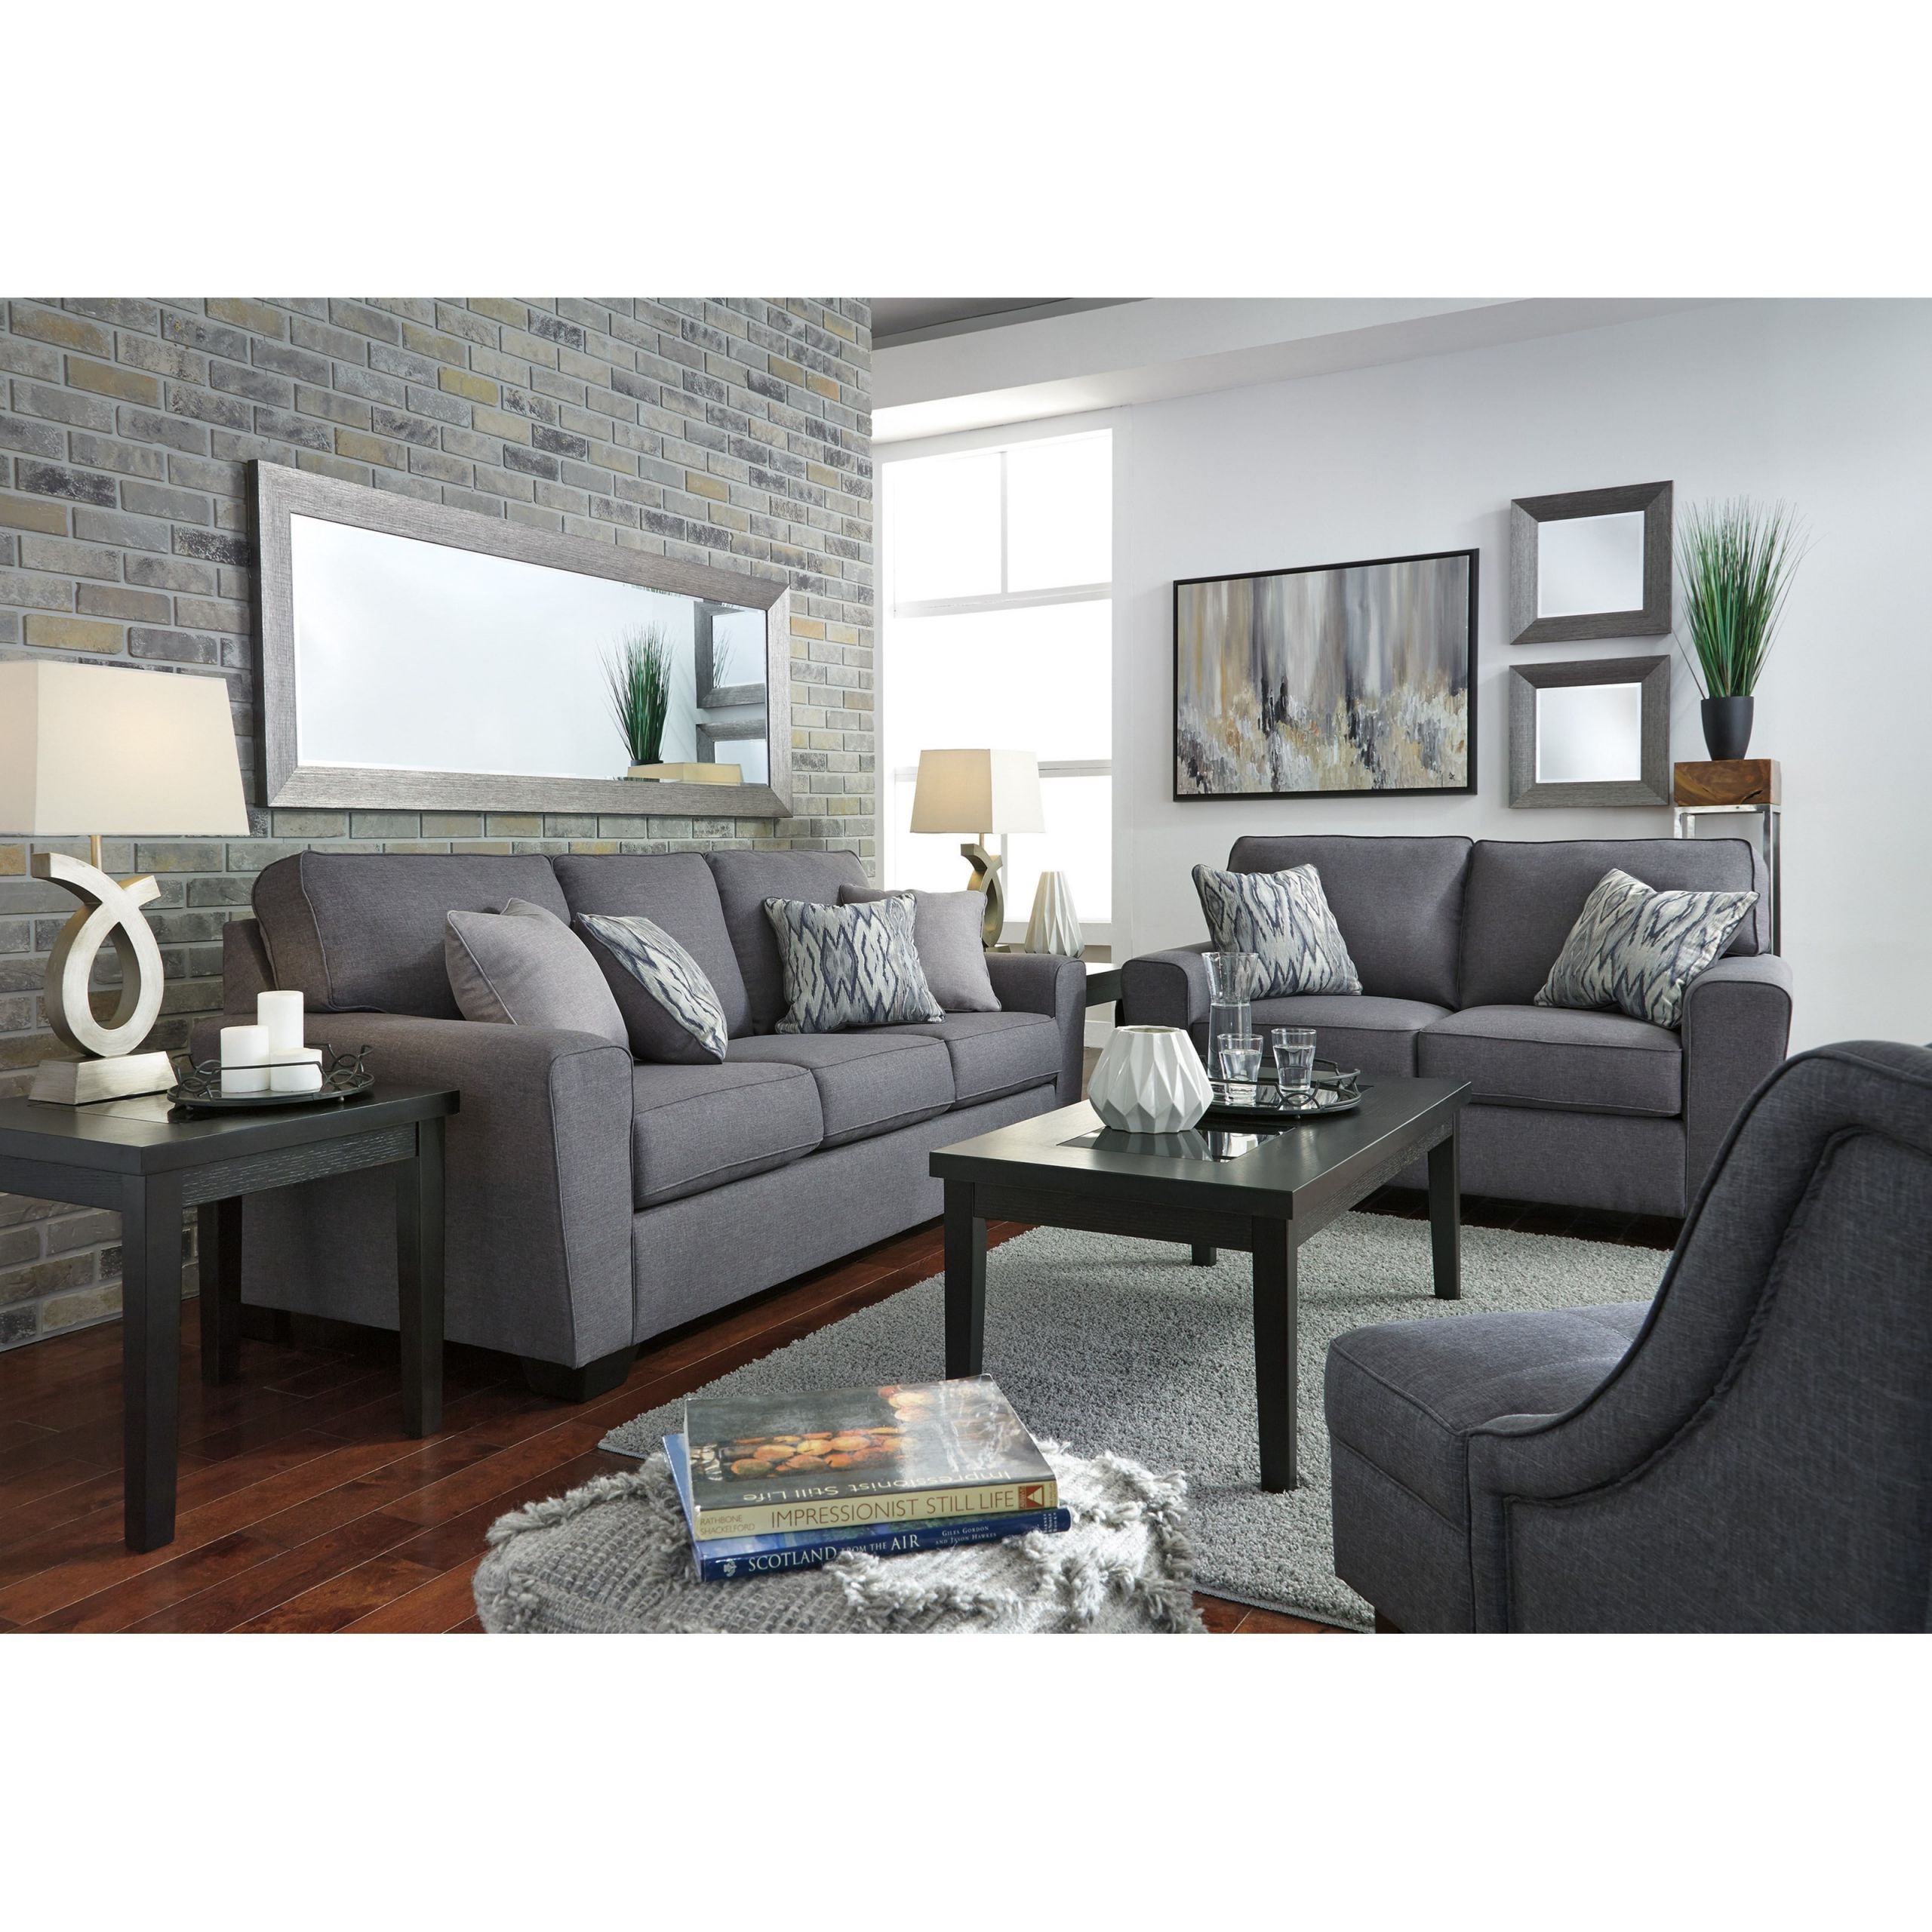 Ashley Living Room Tables
 Ashley Furniture Calion Stationary Living Room Group